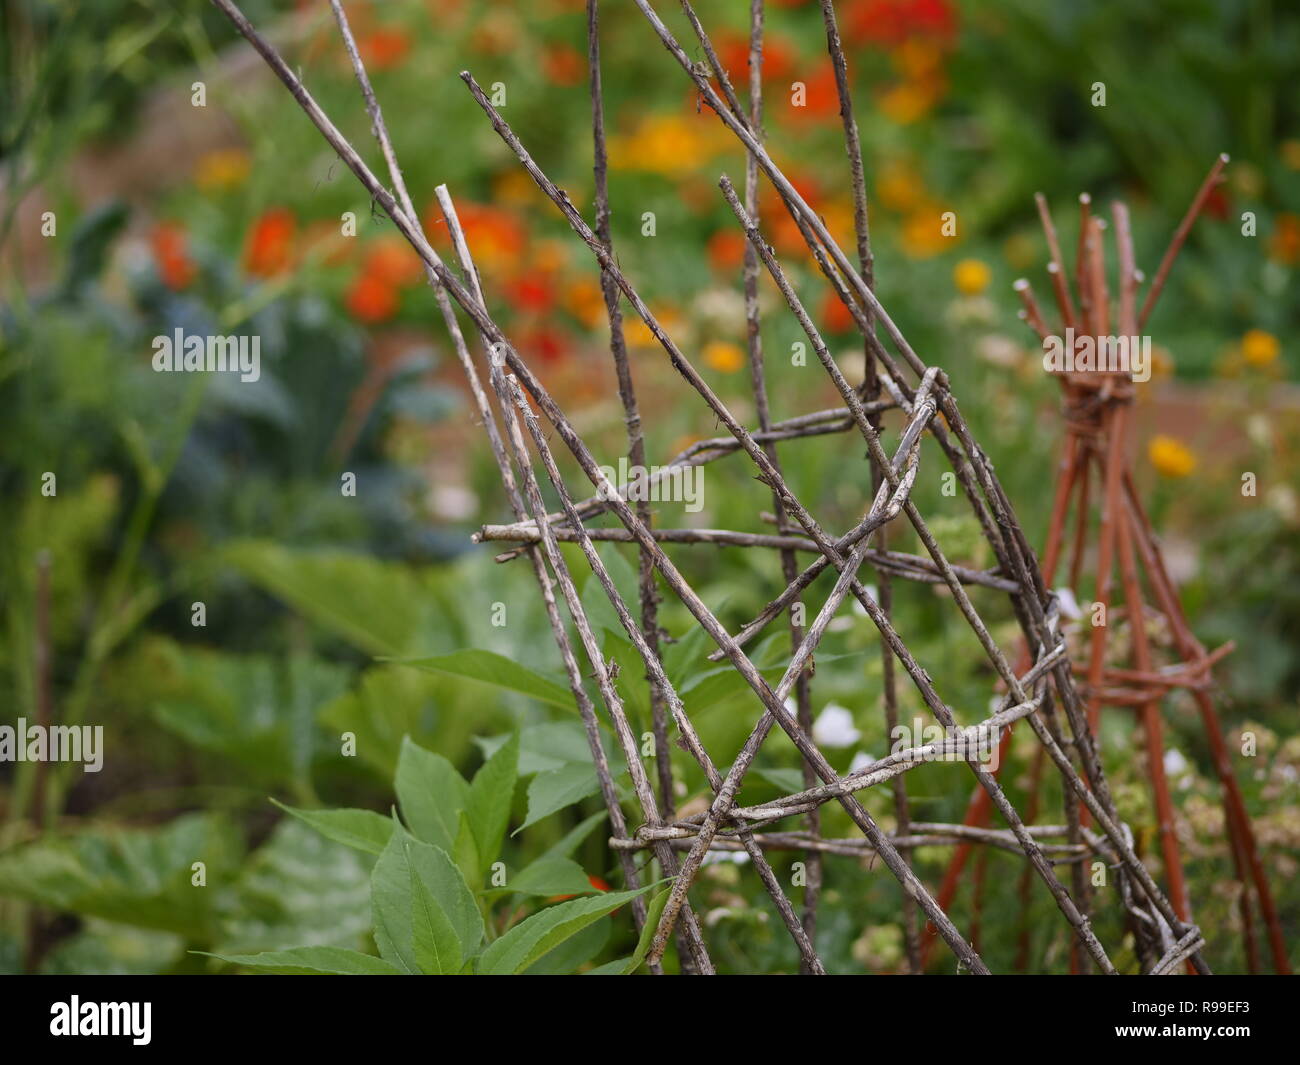 permaculture garden with beans and flowers Stock Photo